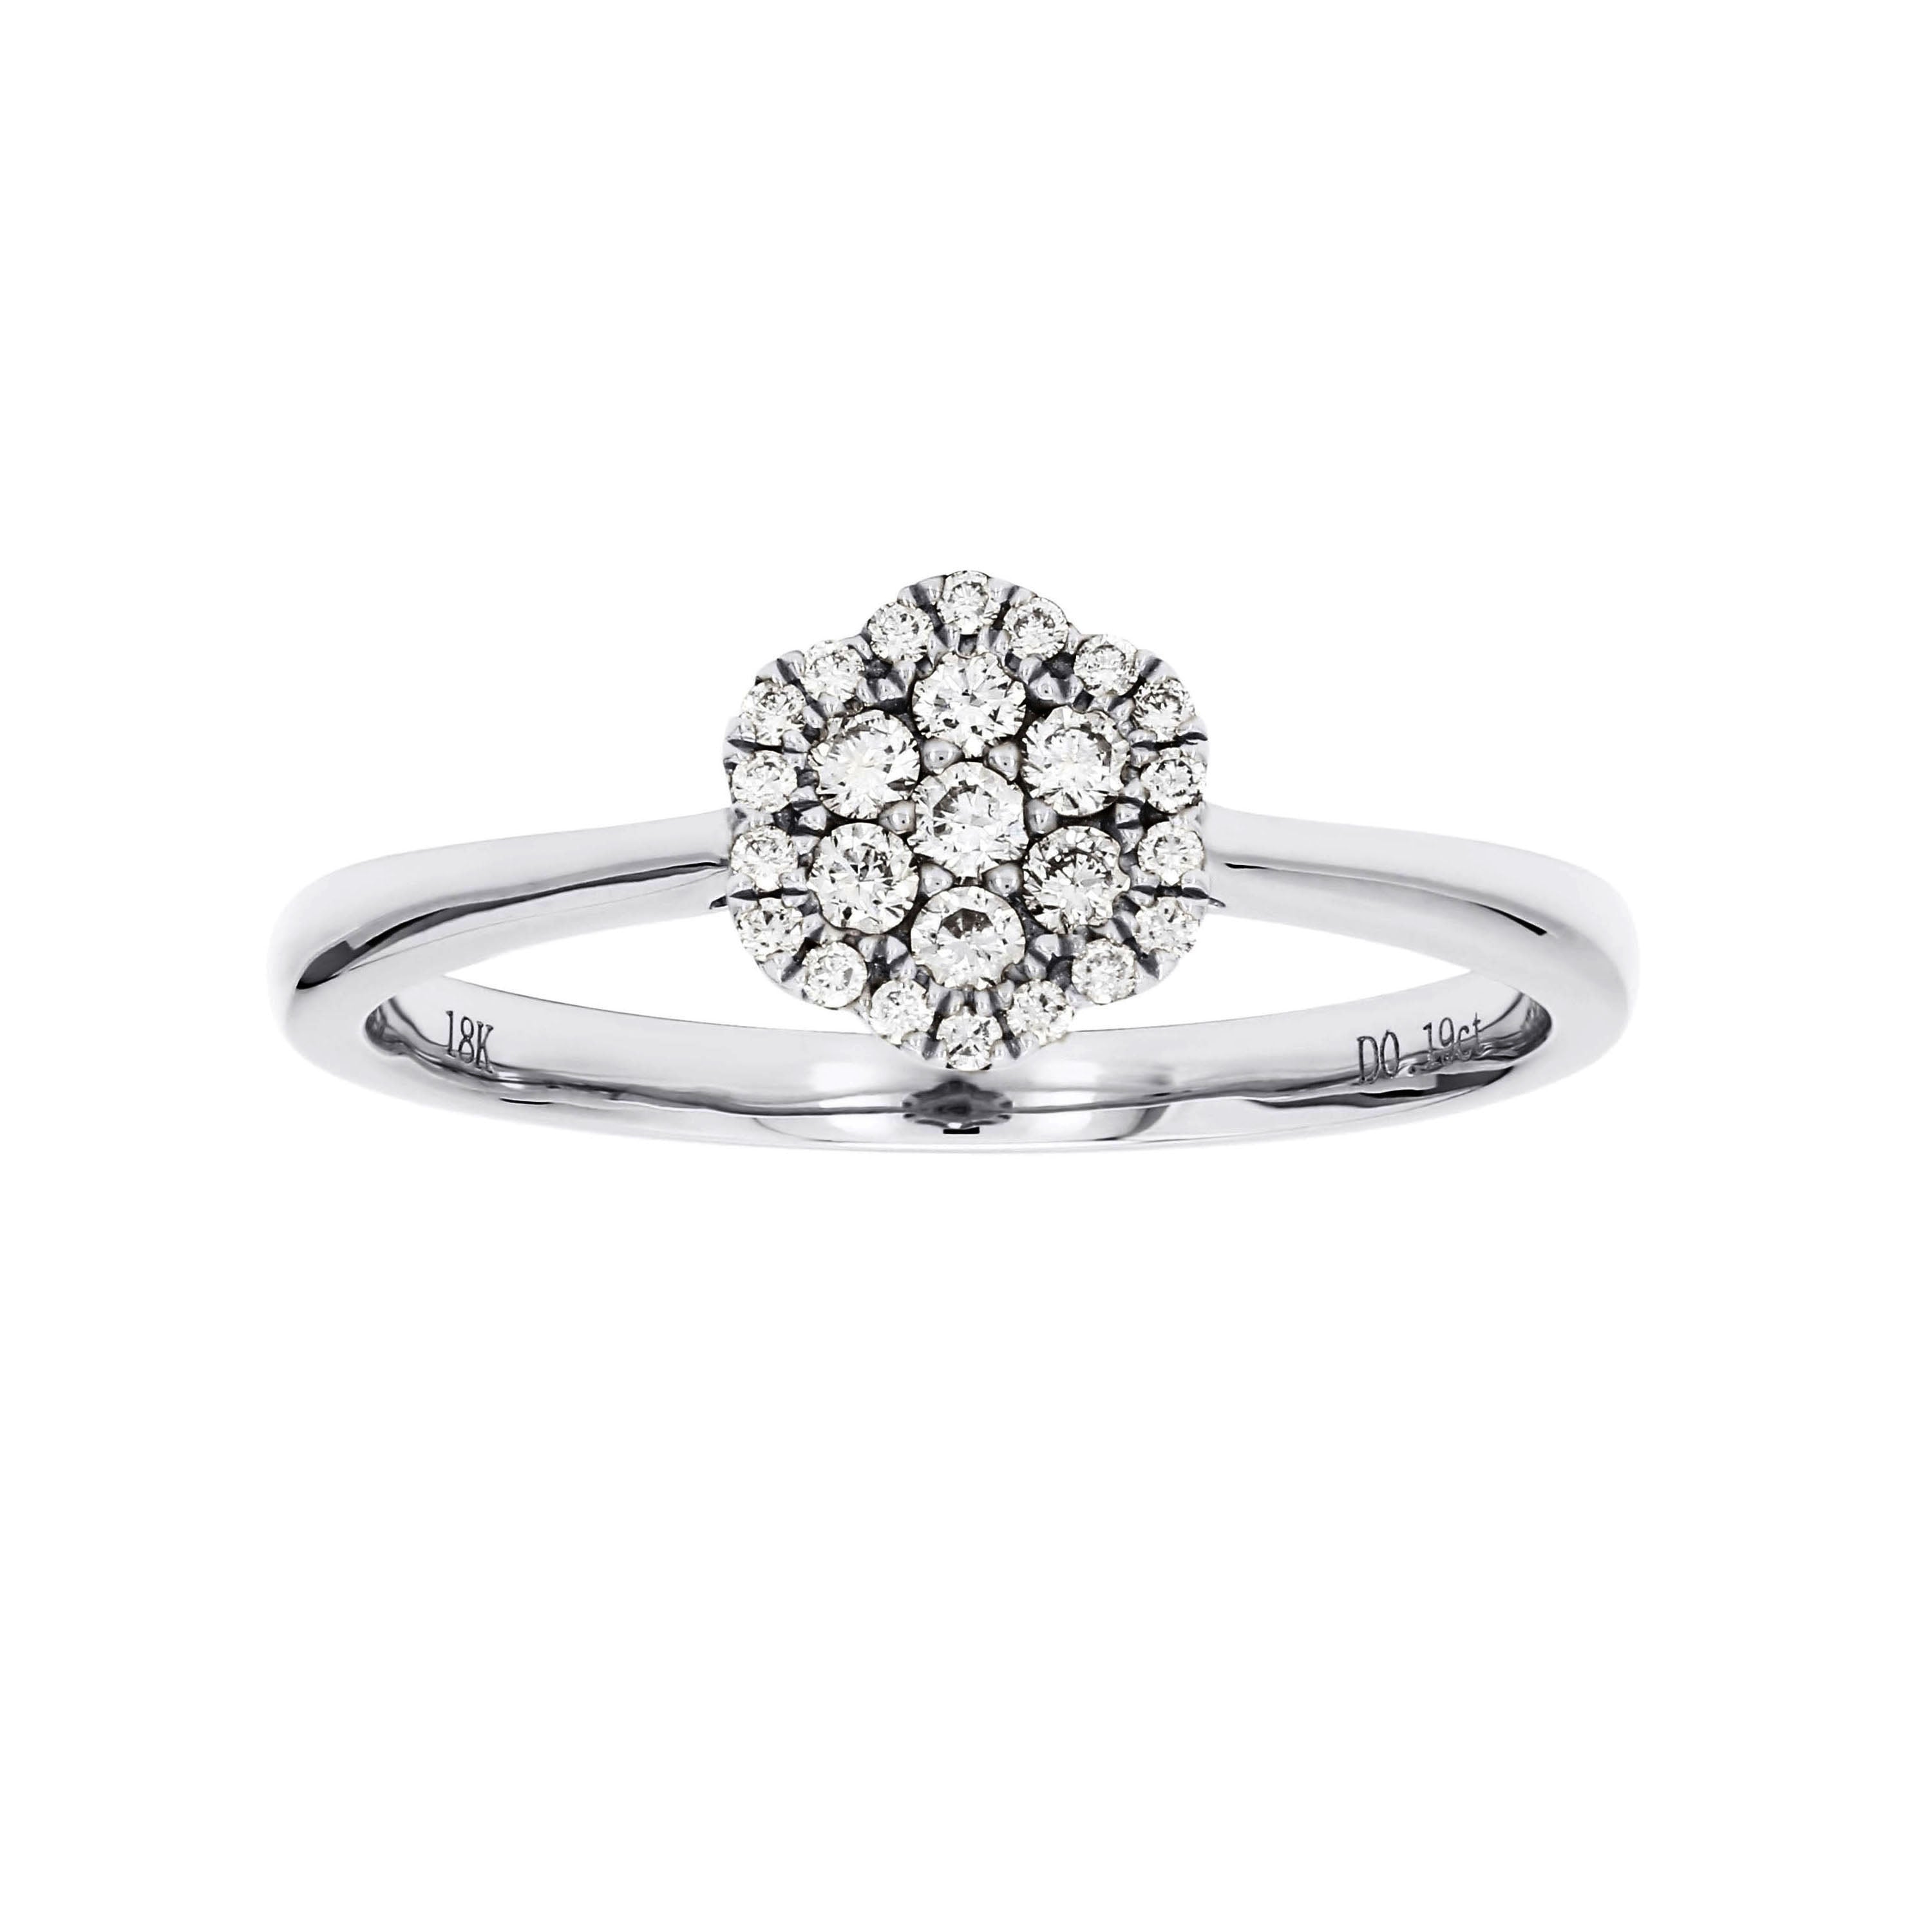 Adamar Jewels Sweet Floral Ring in 18K white gold set with diamonds